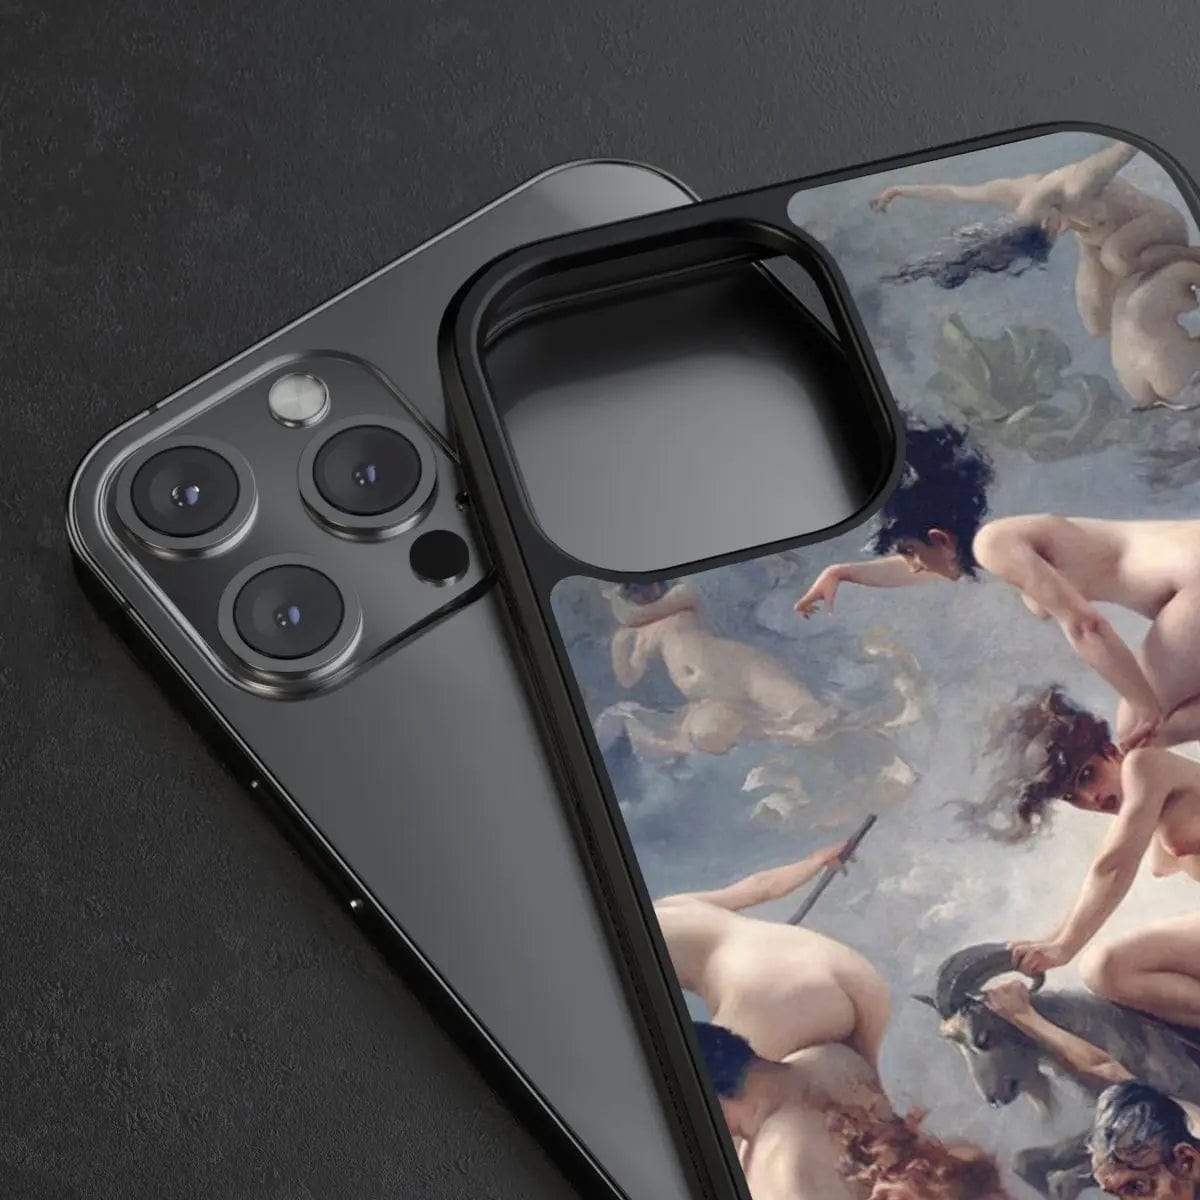 Phone case "Witches" - Artcase